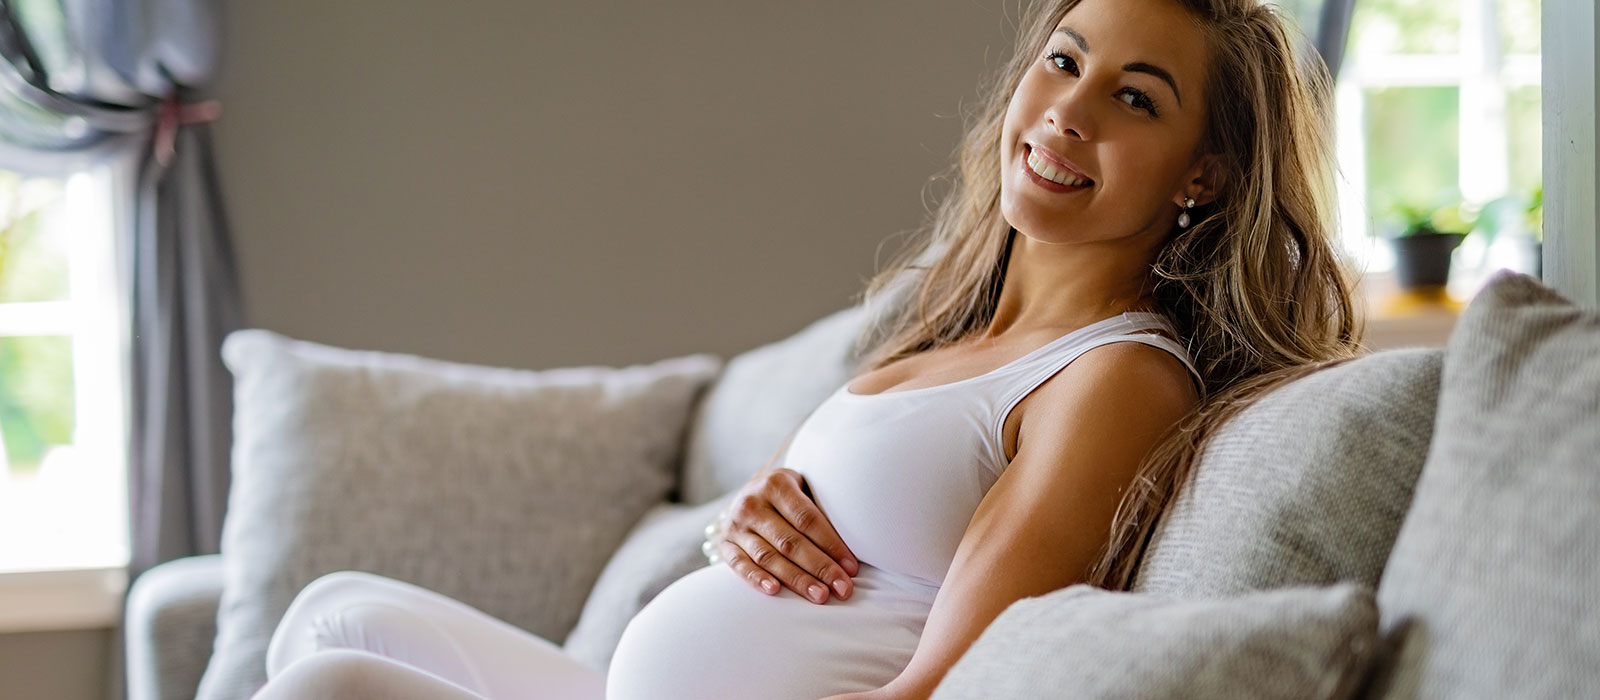 happy pregnant woman sitting in sofa touching her belly